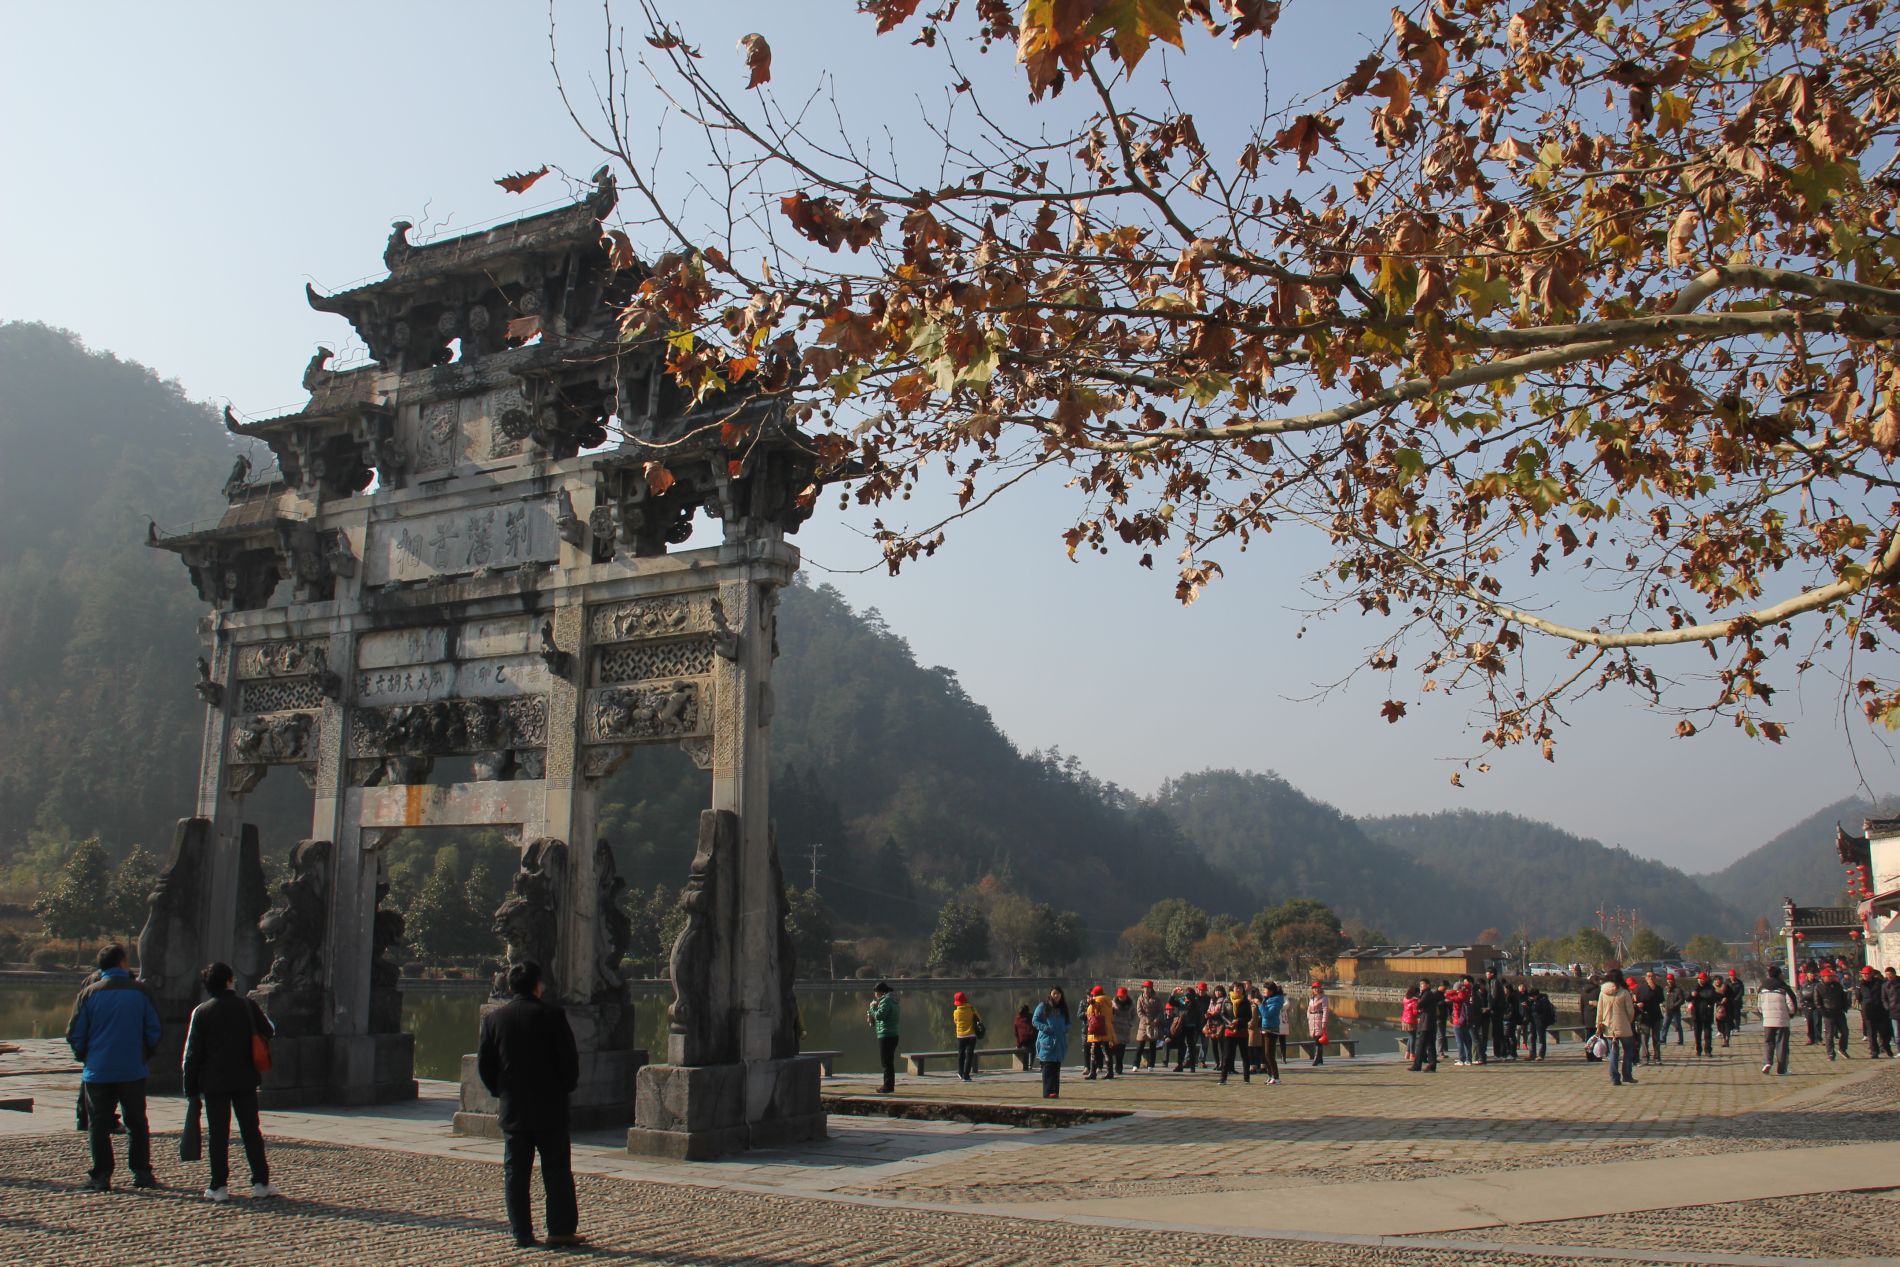 Xidi's Huwenguang Paifang three-tiered entrance arch hails from the Ming dynasty.